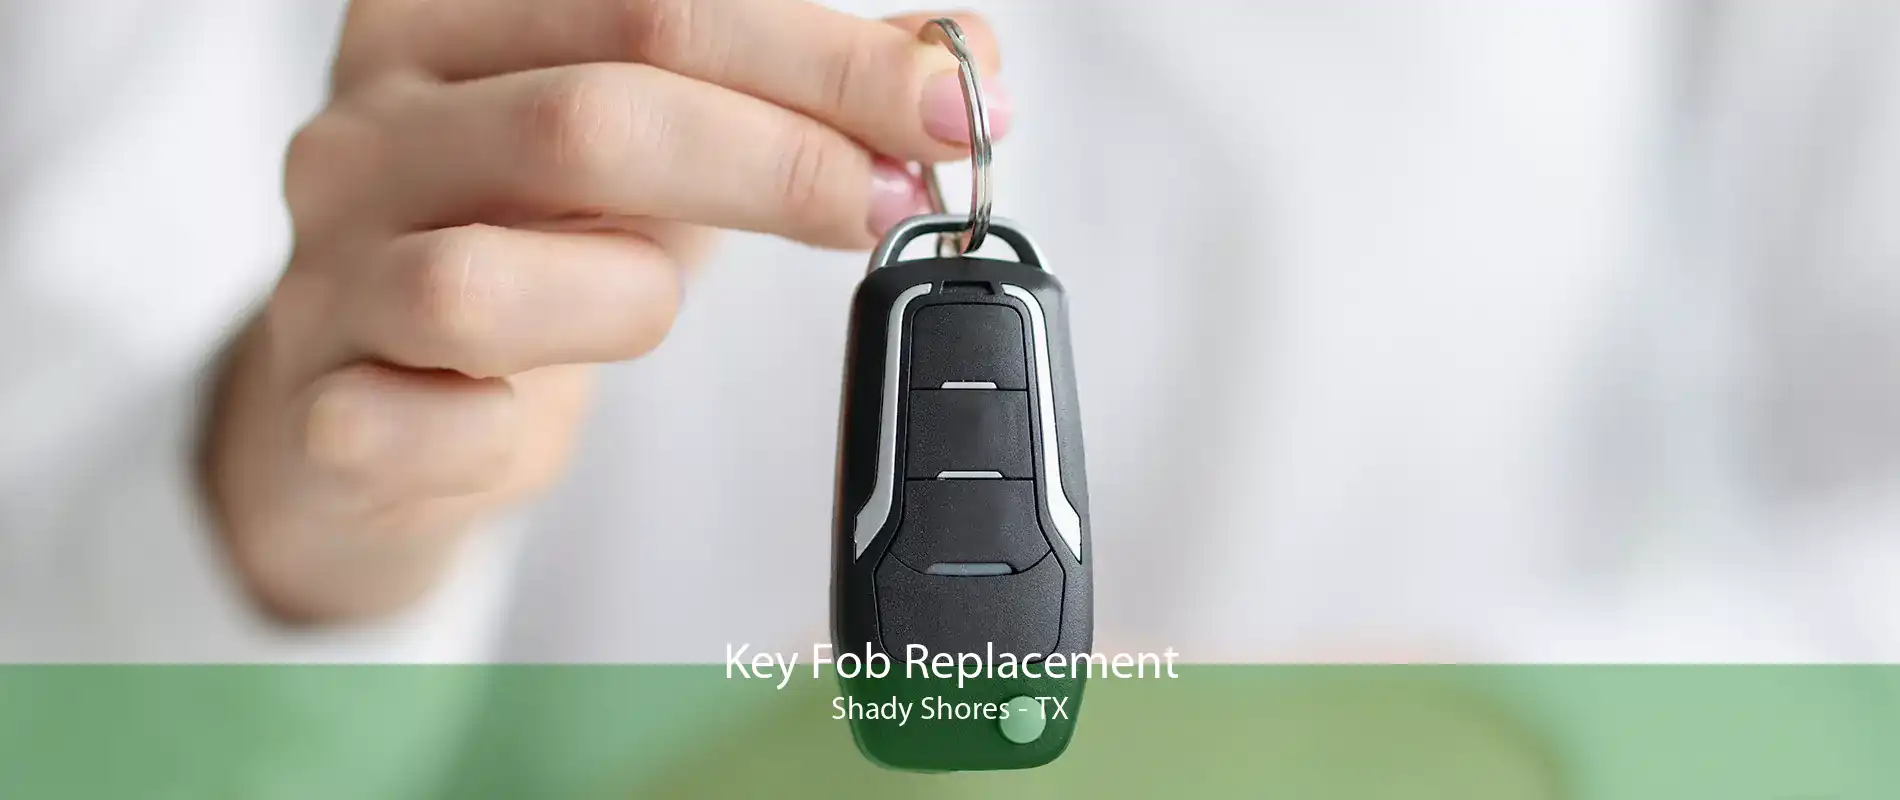 Key Fob Replacement Shady Shores - TX